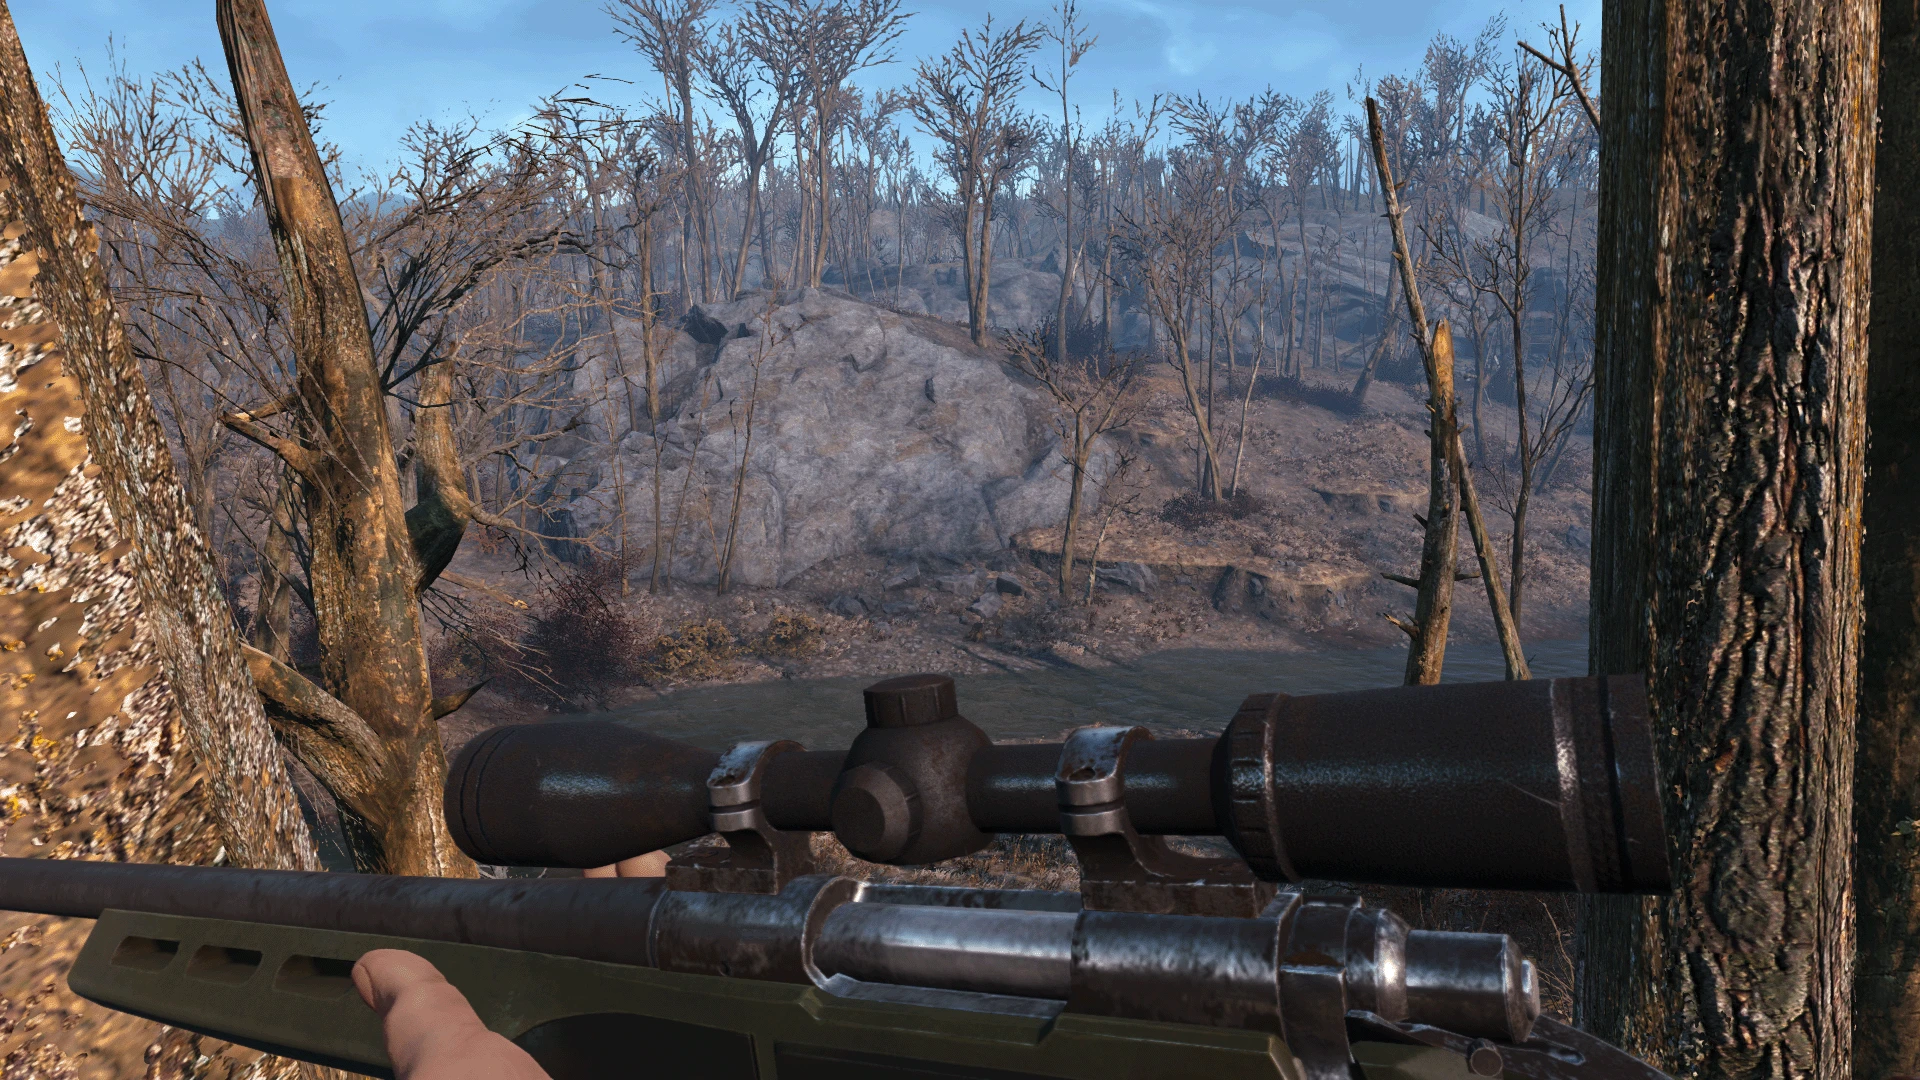 Button lowered weapons fallout 4 фото 2